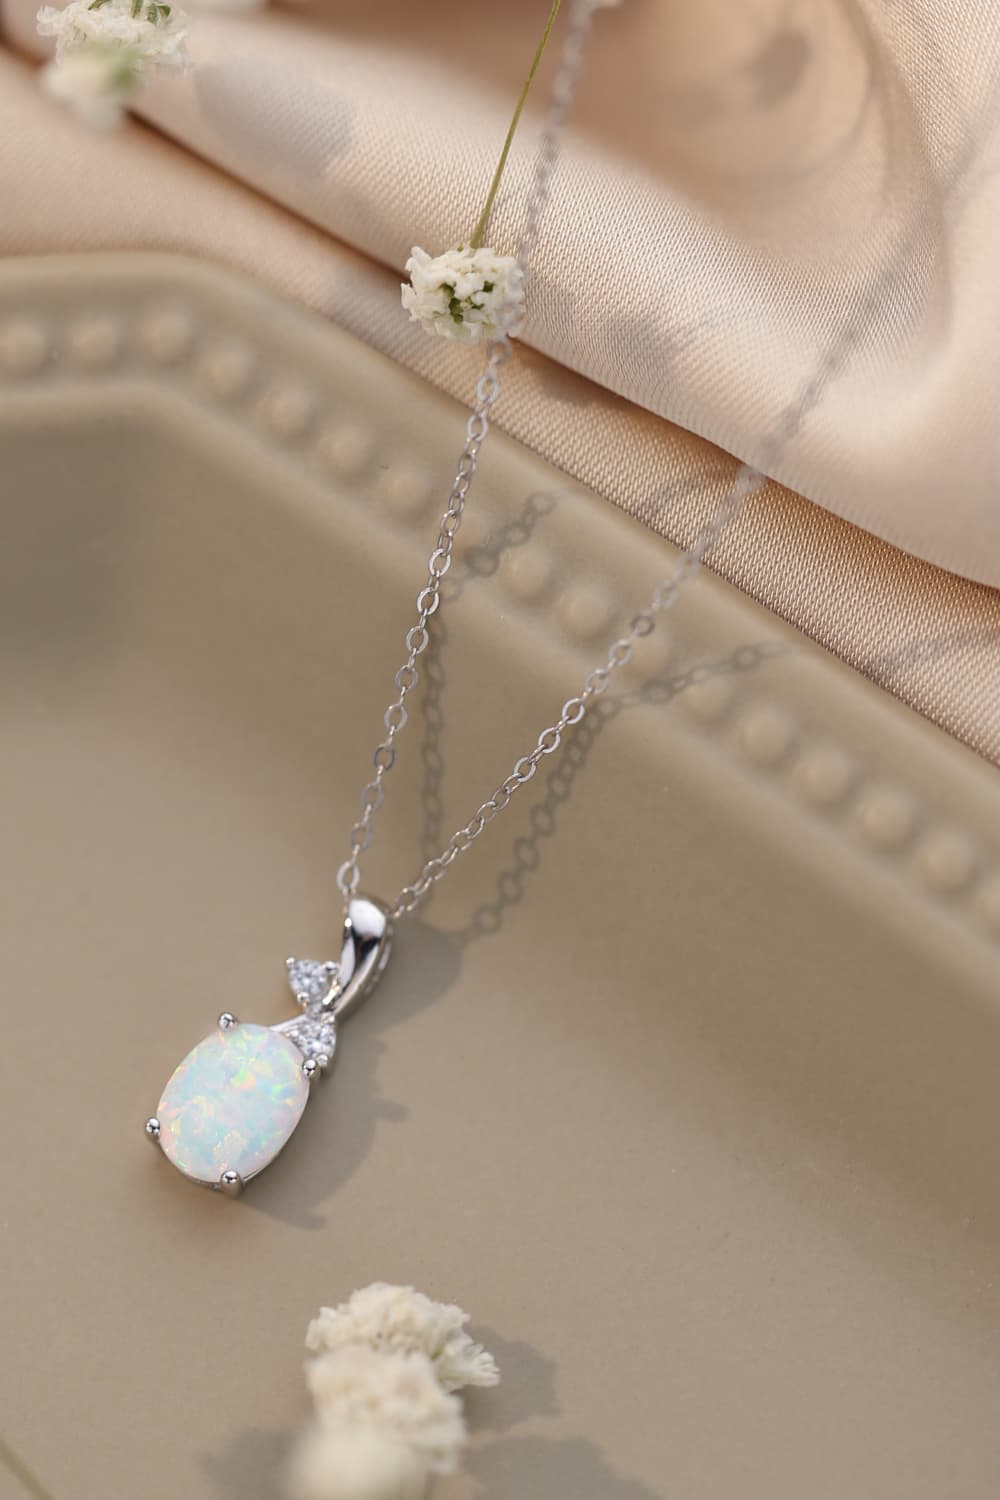 Opal Oval Pendant Chain Necklace BLUE ZONE PLANET